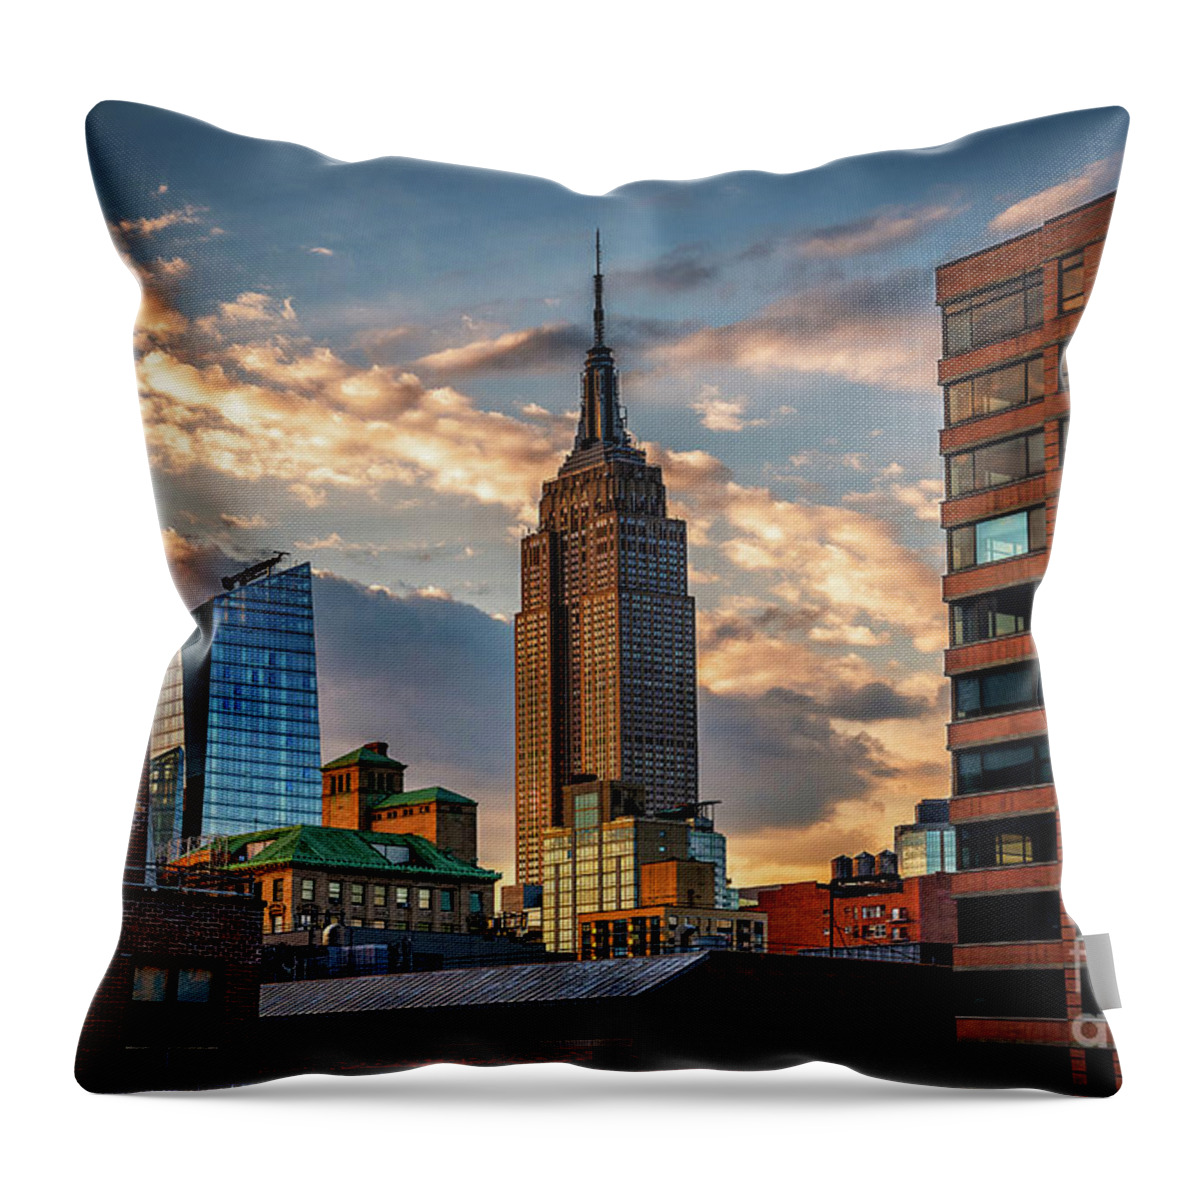 Flatiron Building Throw Pillow featuring the photograph Empire State Building Sunset Rooftop by Alissa Beth Photography